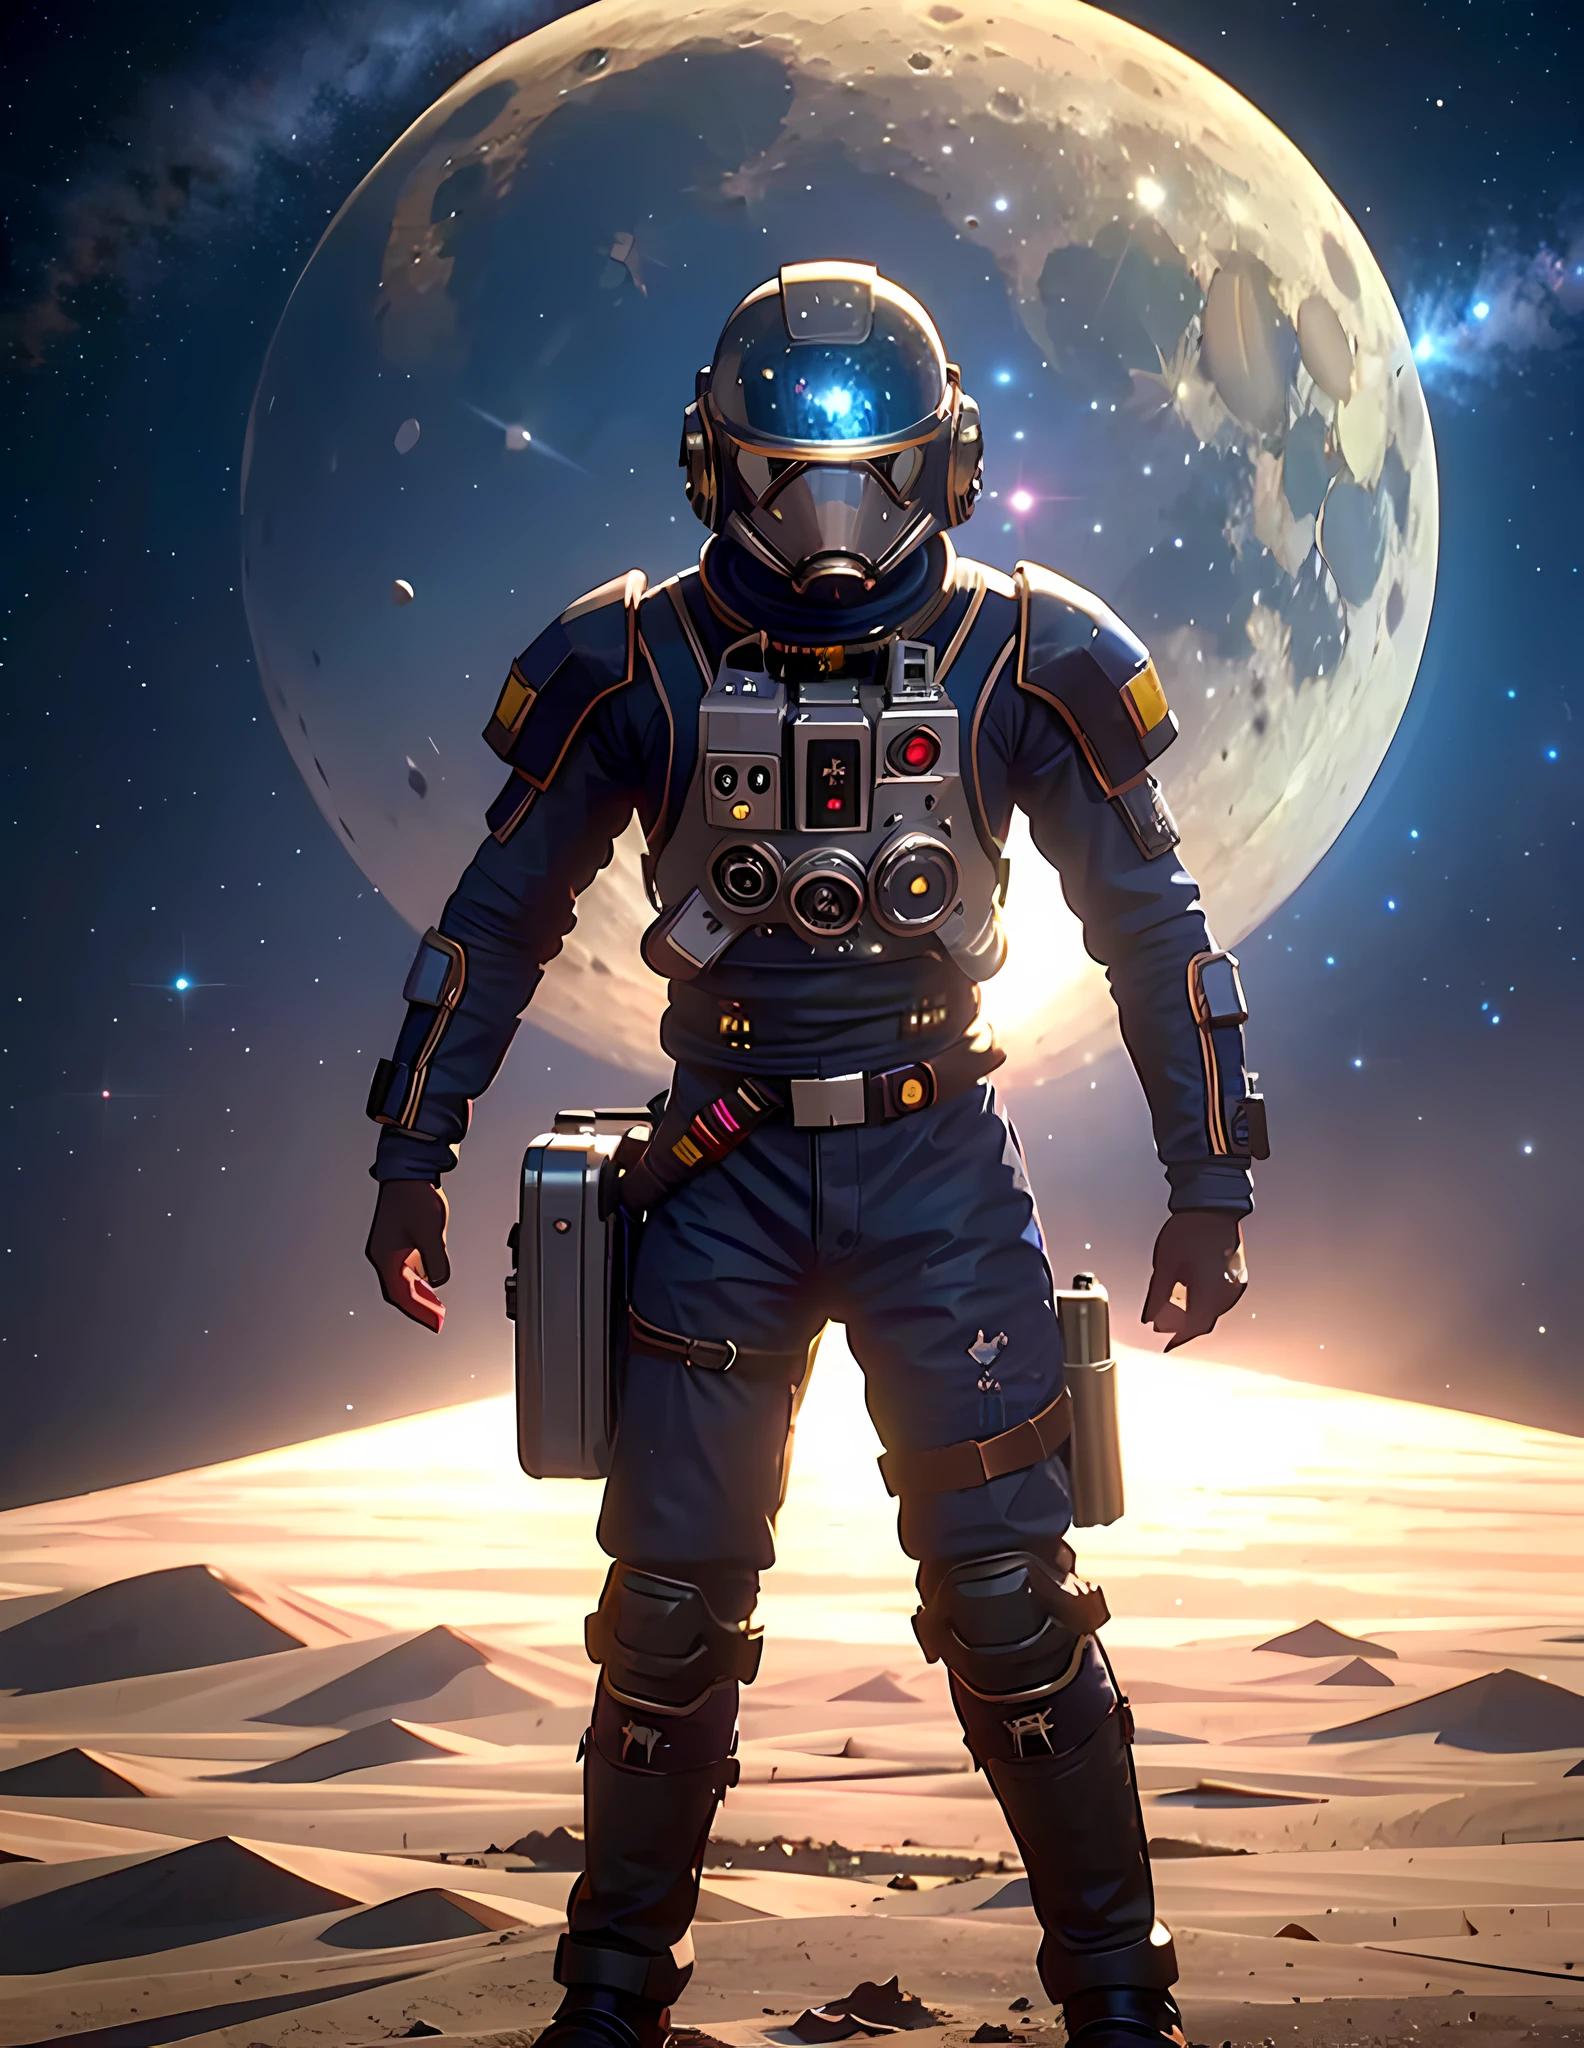 astronaut, george lucas style, walking on the lunar surface, intricate spacesuit, helmet with mirrored viewfinder, detailed landscape of the moon in the background, mysterious monoliths in the background, starry sky, wide view, sharp focus, dramatic lighting, by george lucas, star wars movie, award-winning, best quality, ultrahd wallpaper 8k 4k, concept art, trend on artstation